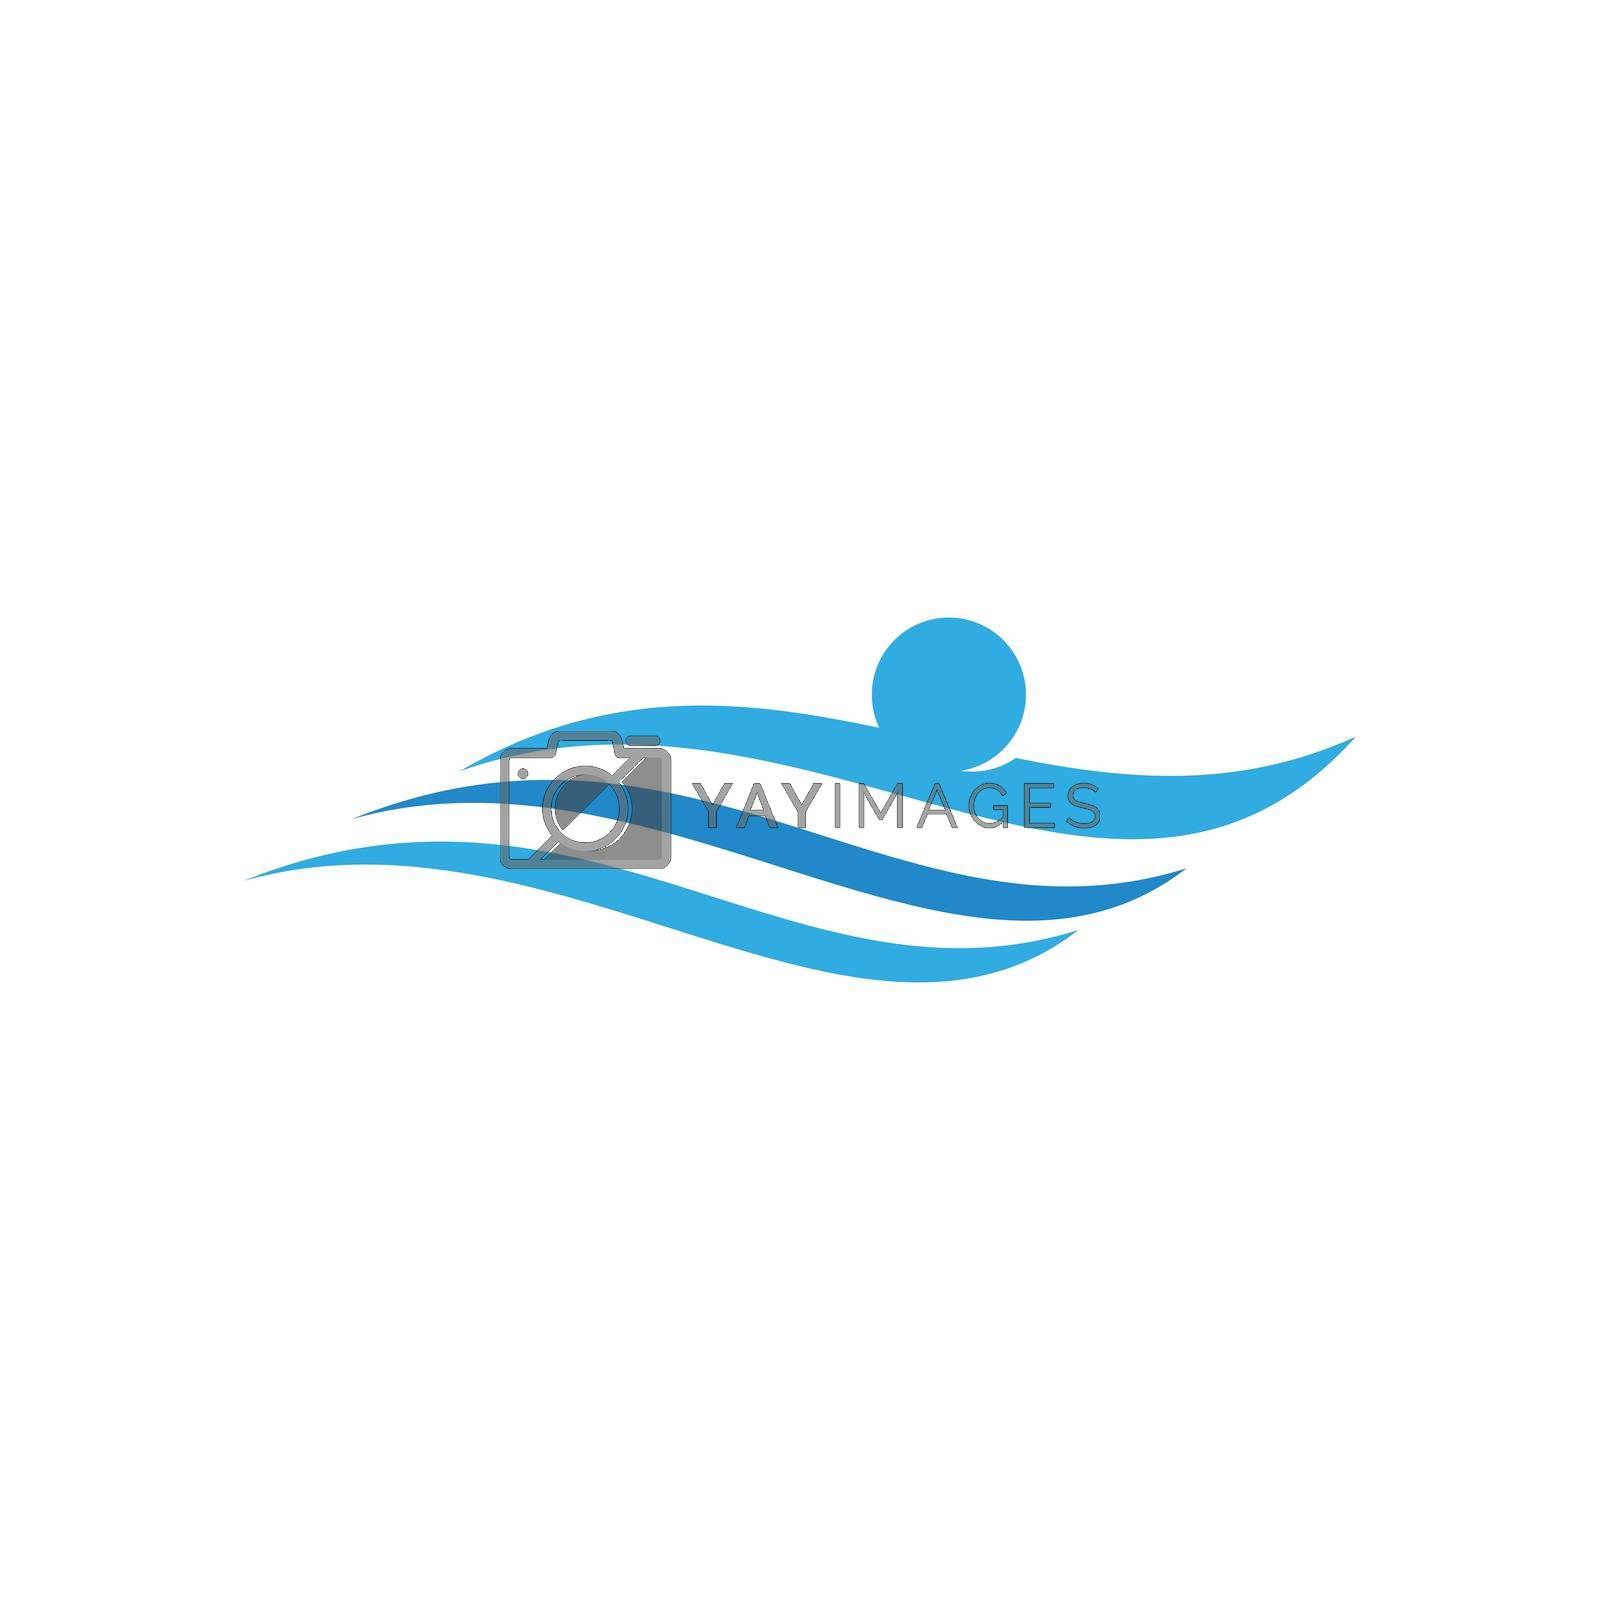 Royalty free image of Swimming sport logo by awk